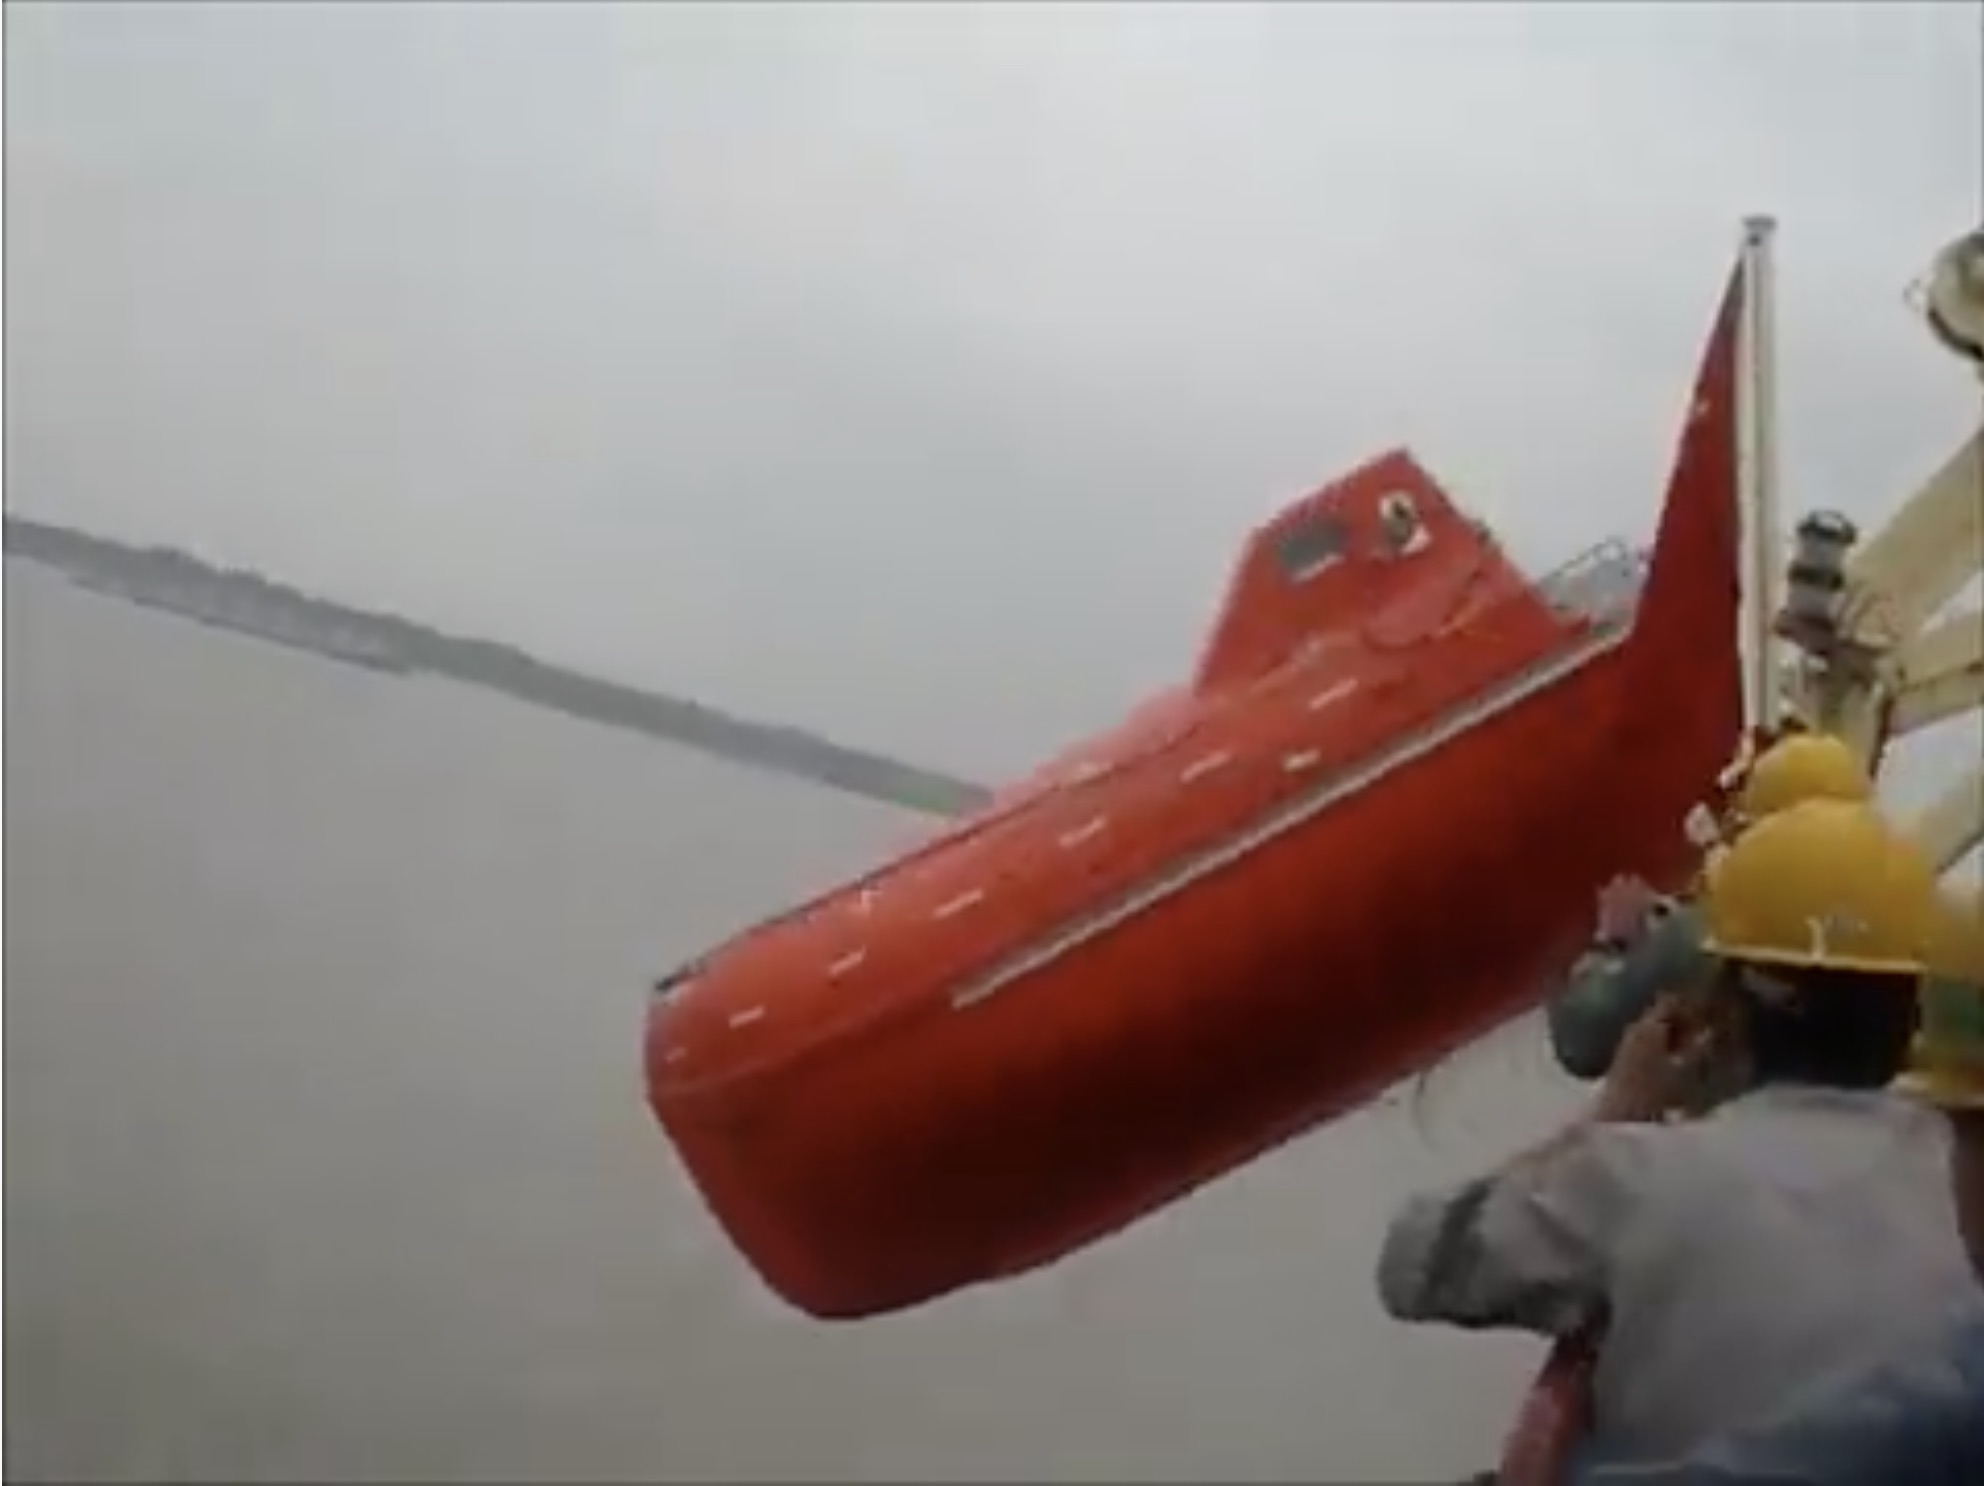 Best of 2019: This Free-Fall Lifeboat Launch Turns Into The Vomit Comet In One Quick Motion!